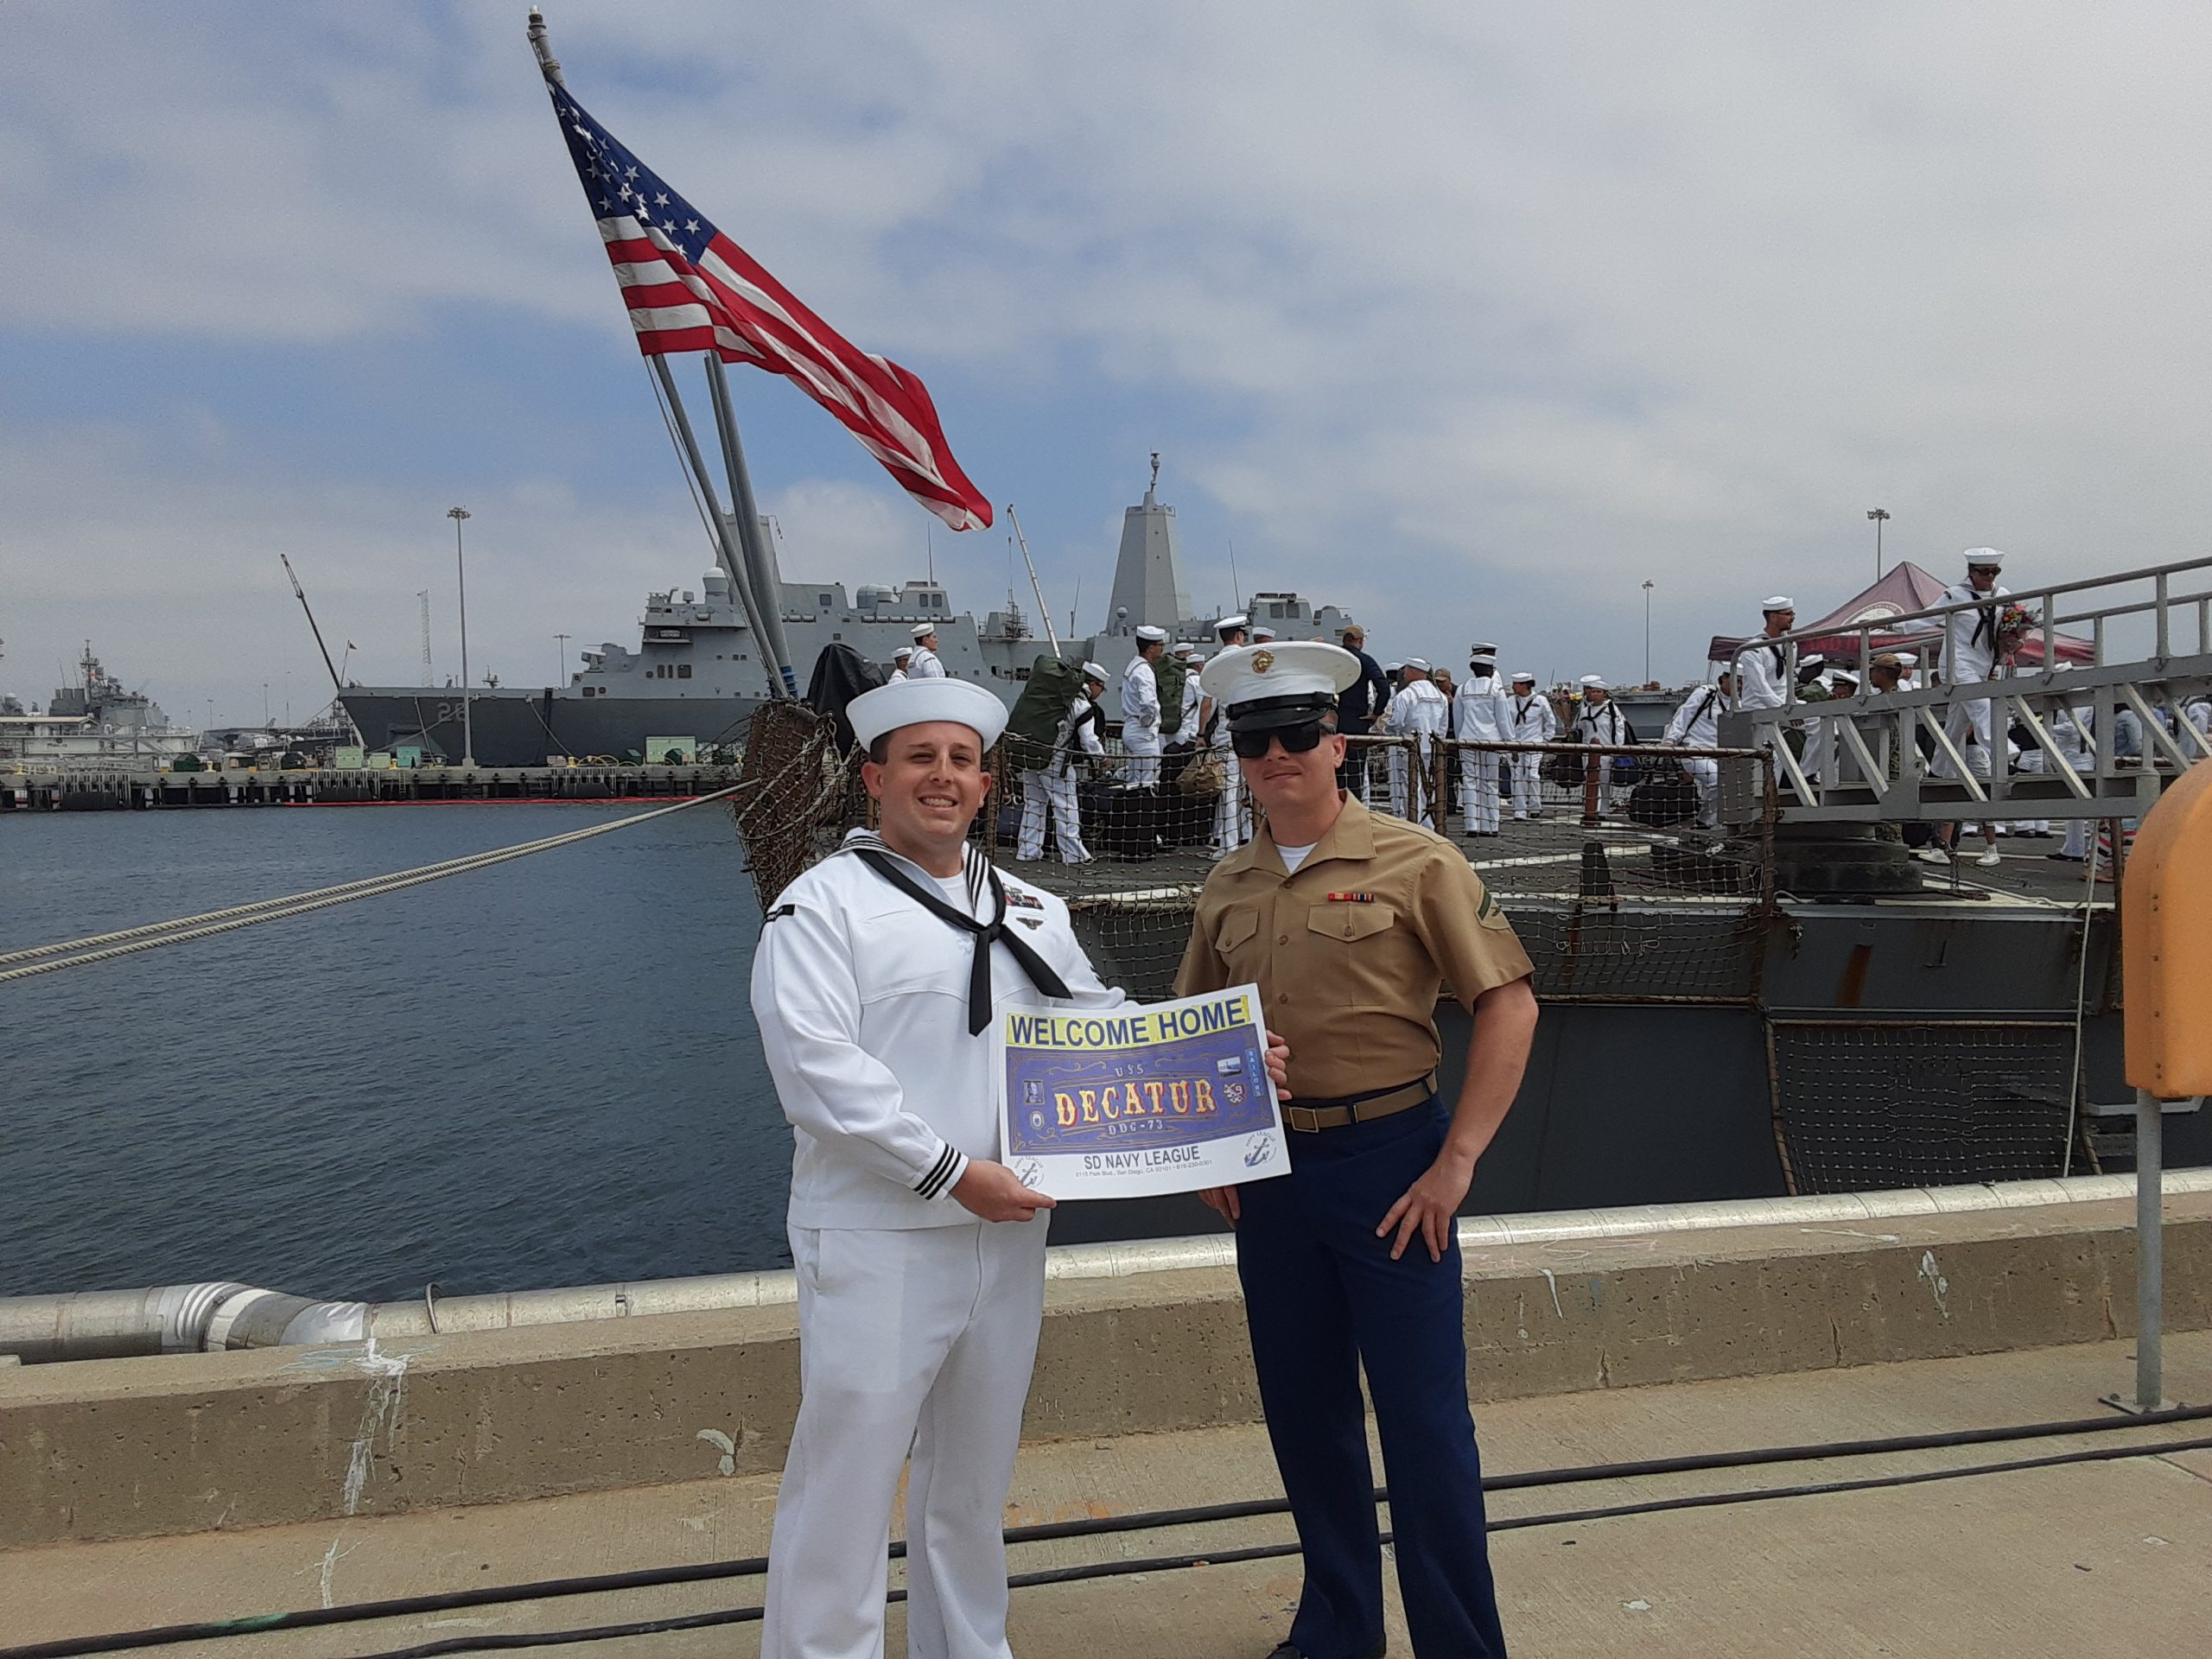 Welcome Home – USS DECATUR (DDG 73) (2)